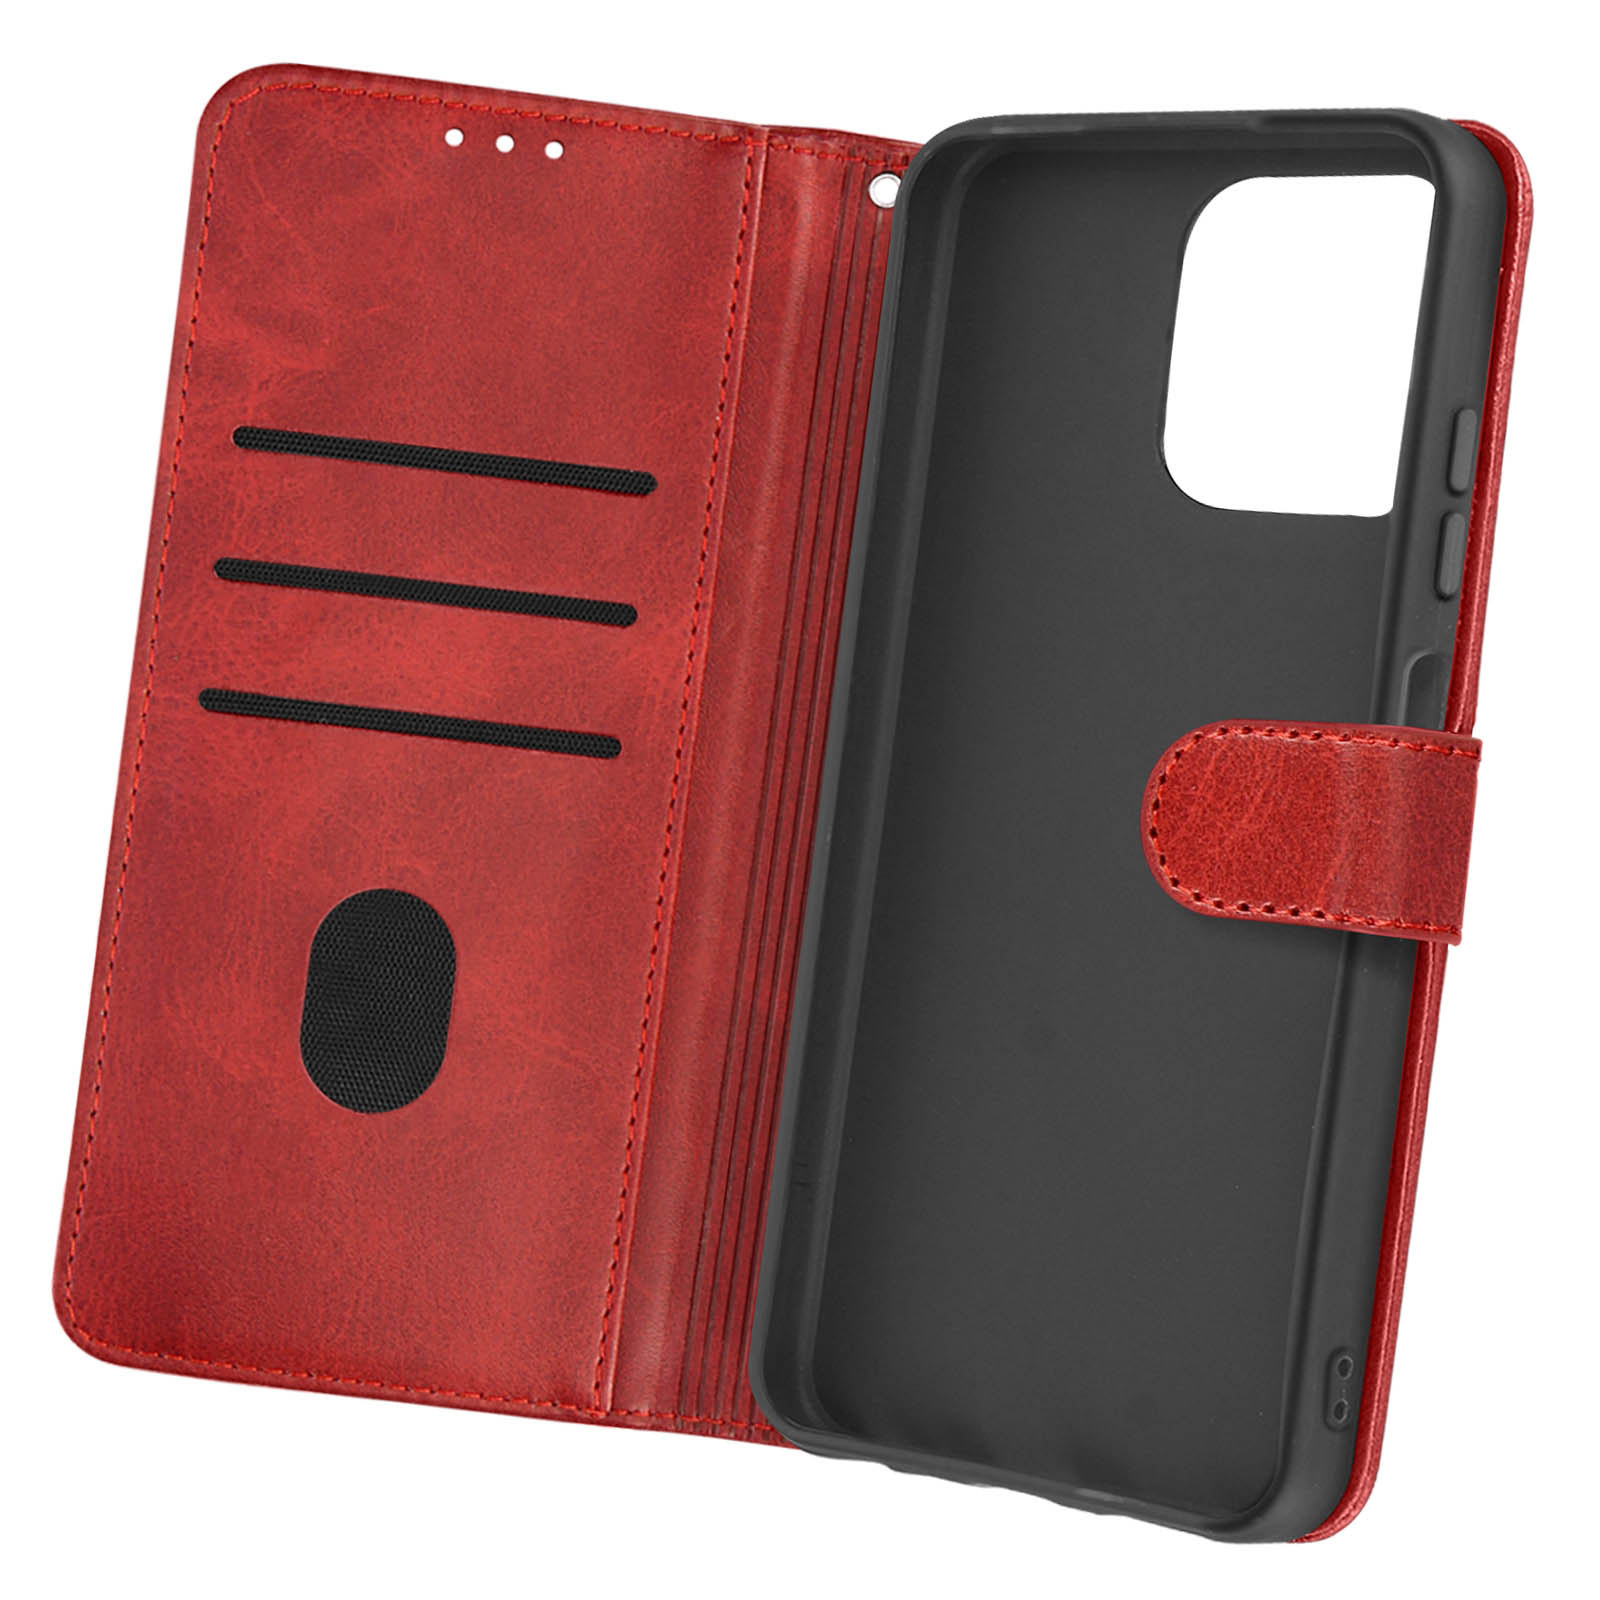 16 Bookstyle Rot Series, Note Bookcover, AVIZAR Ulefone, Pro,